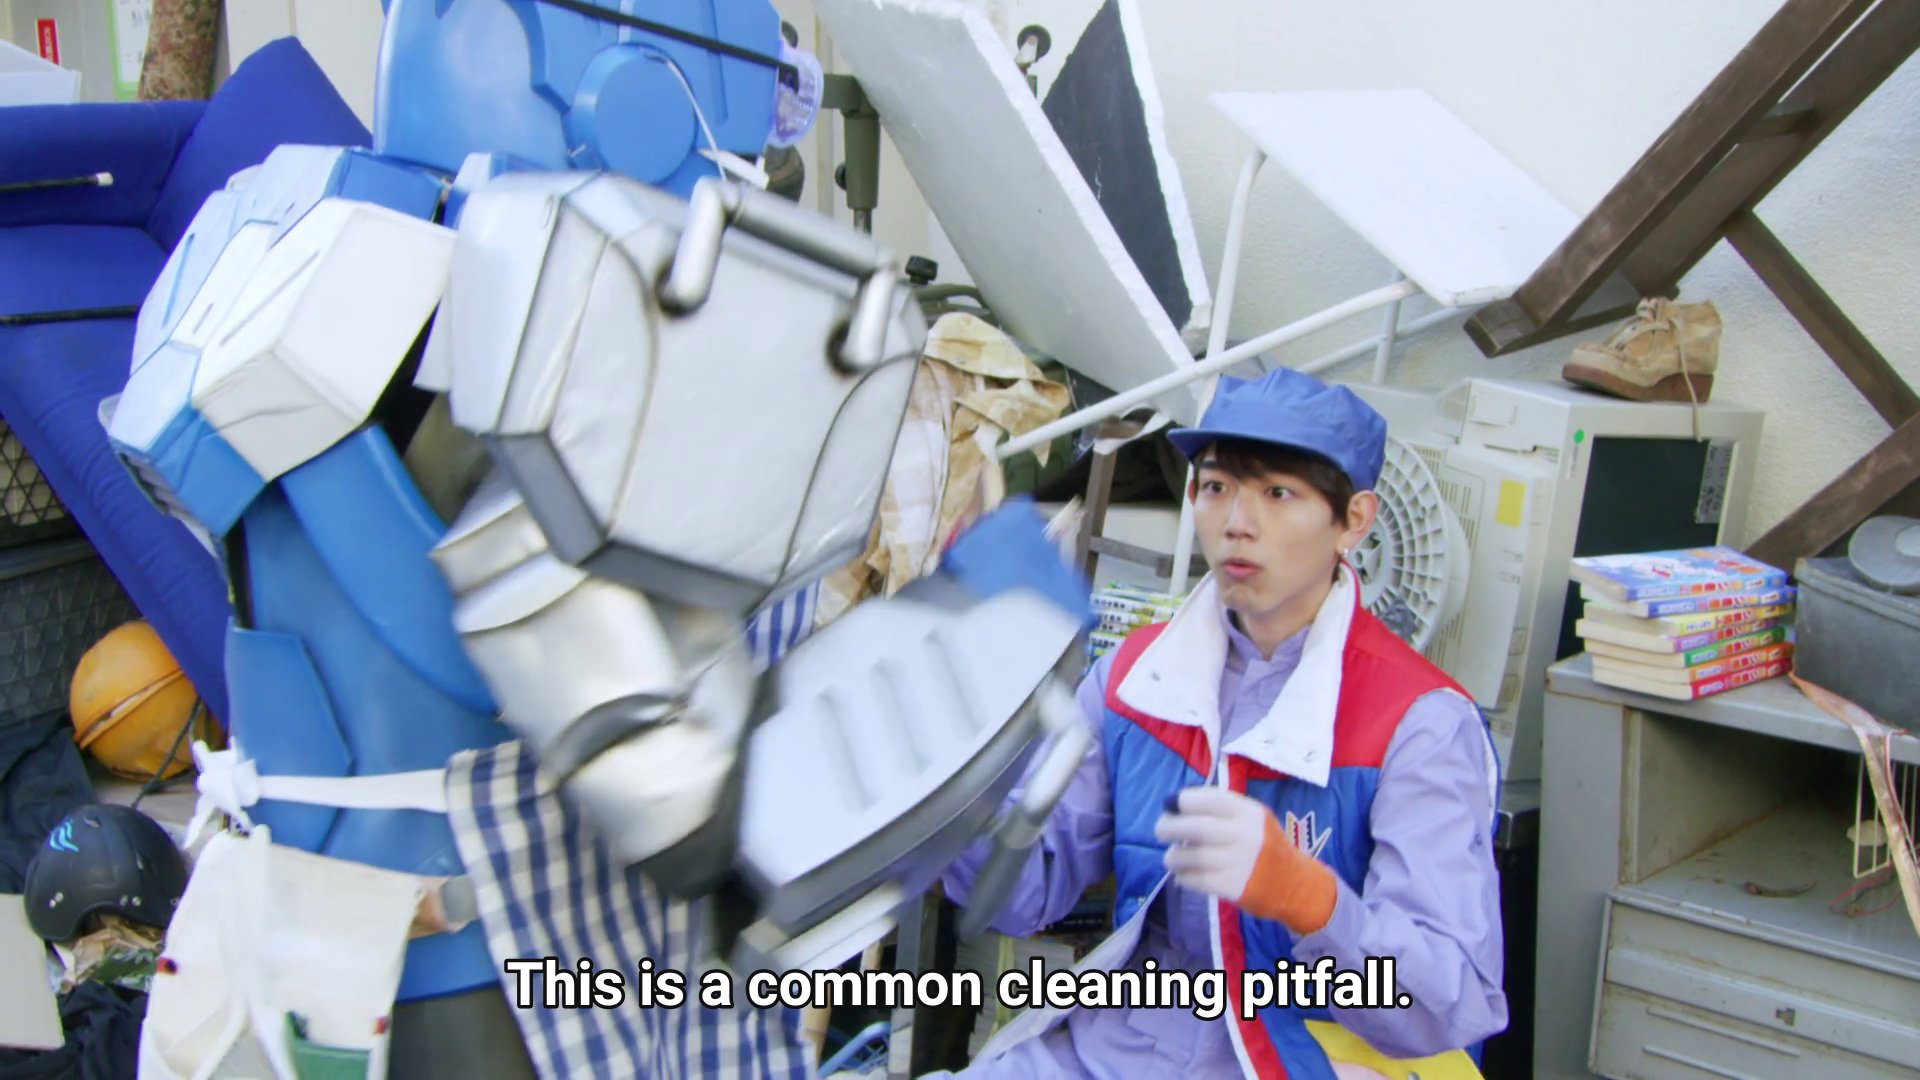 Kaito sitting surrounded by rubbish, getting scolded by Vroon: This is a common cleaning pitfall.